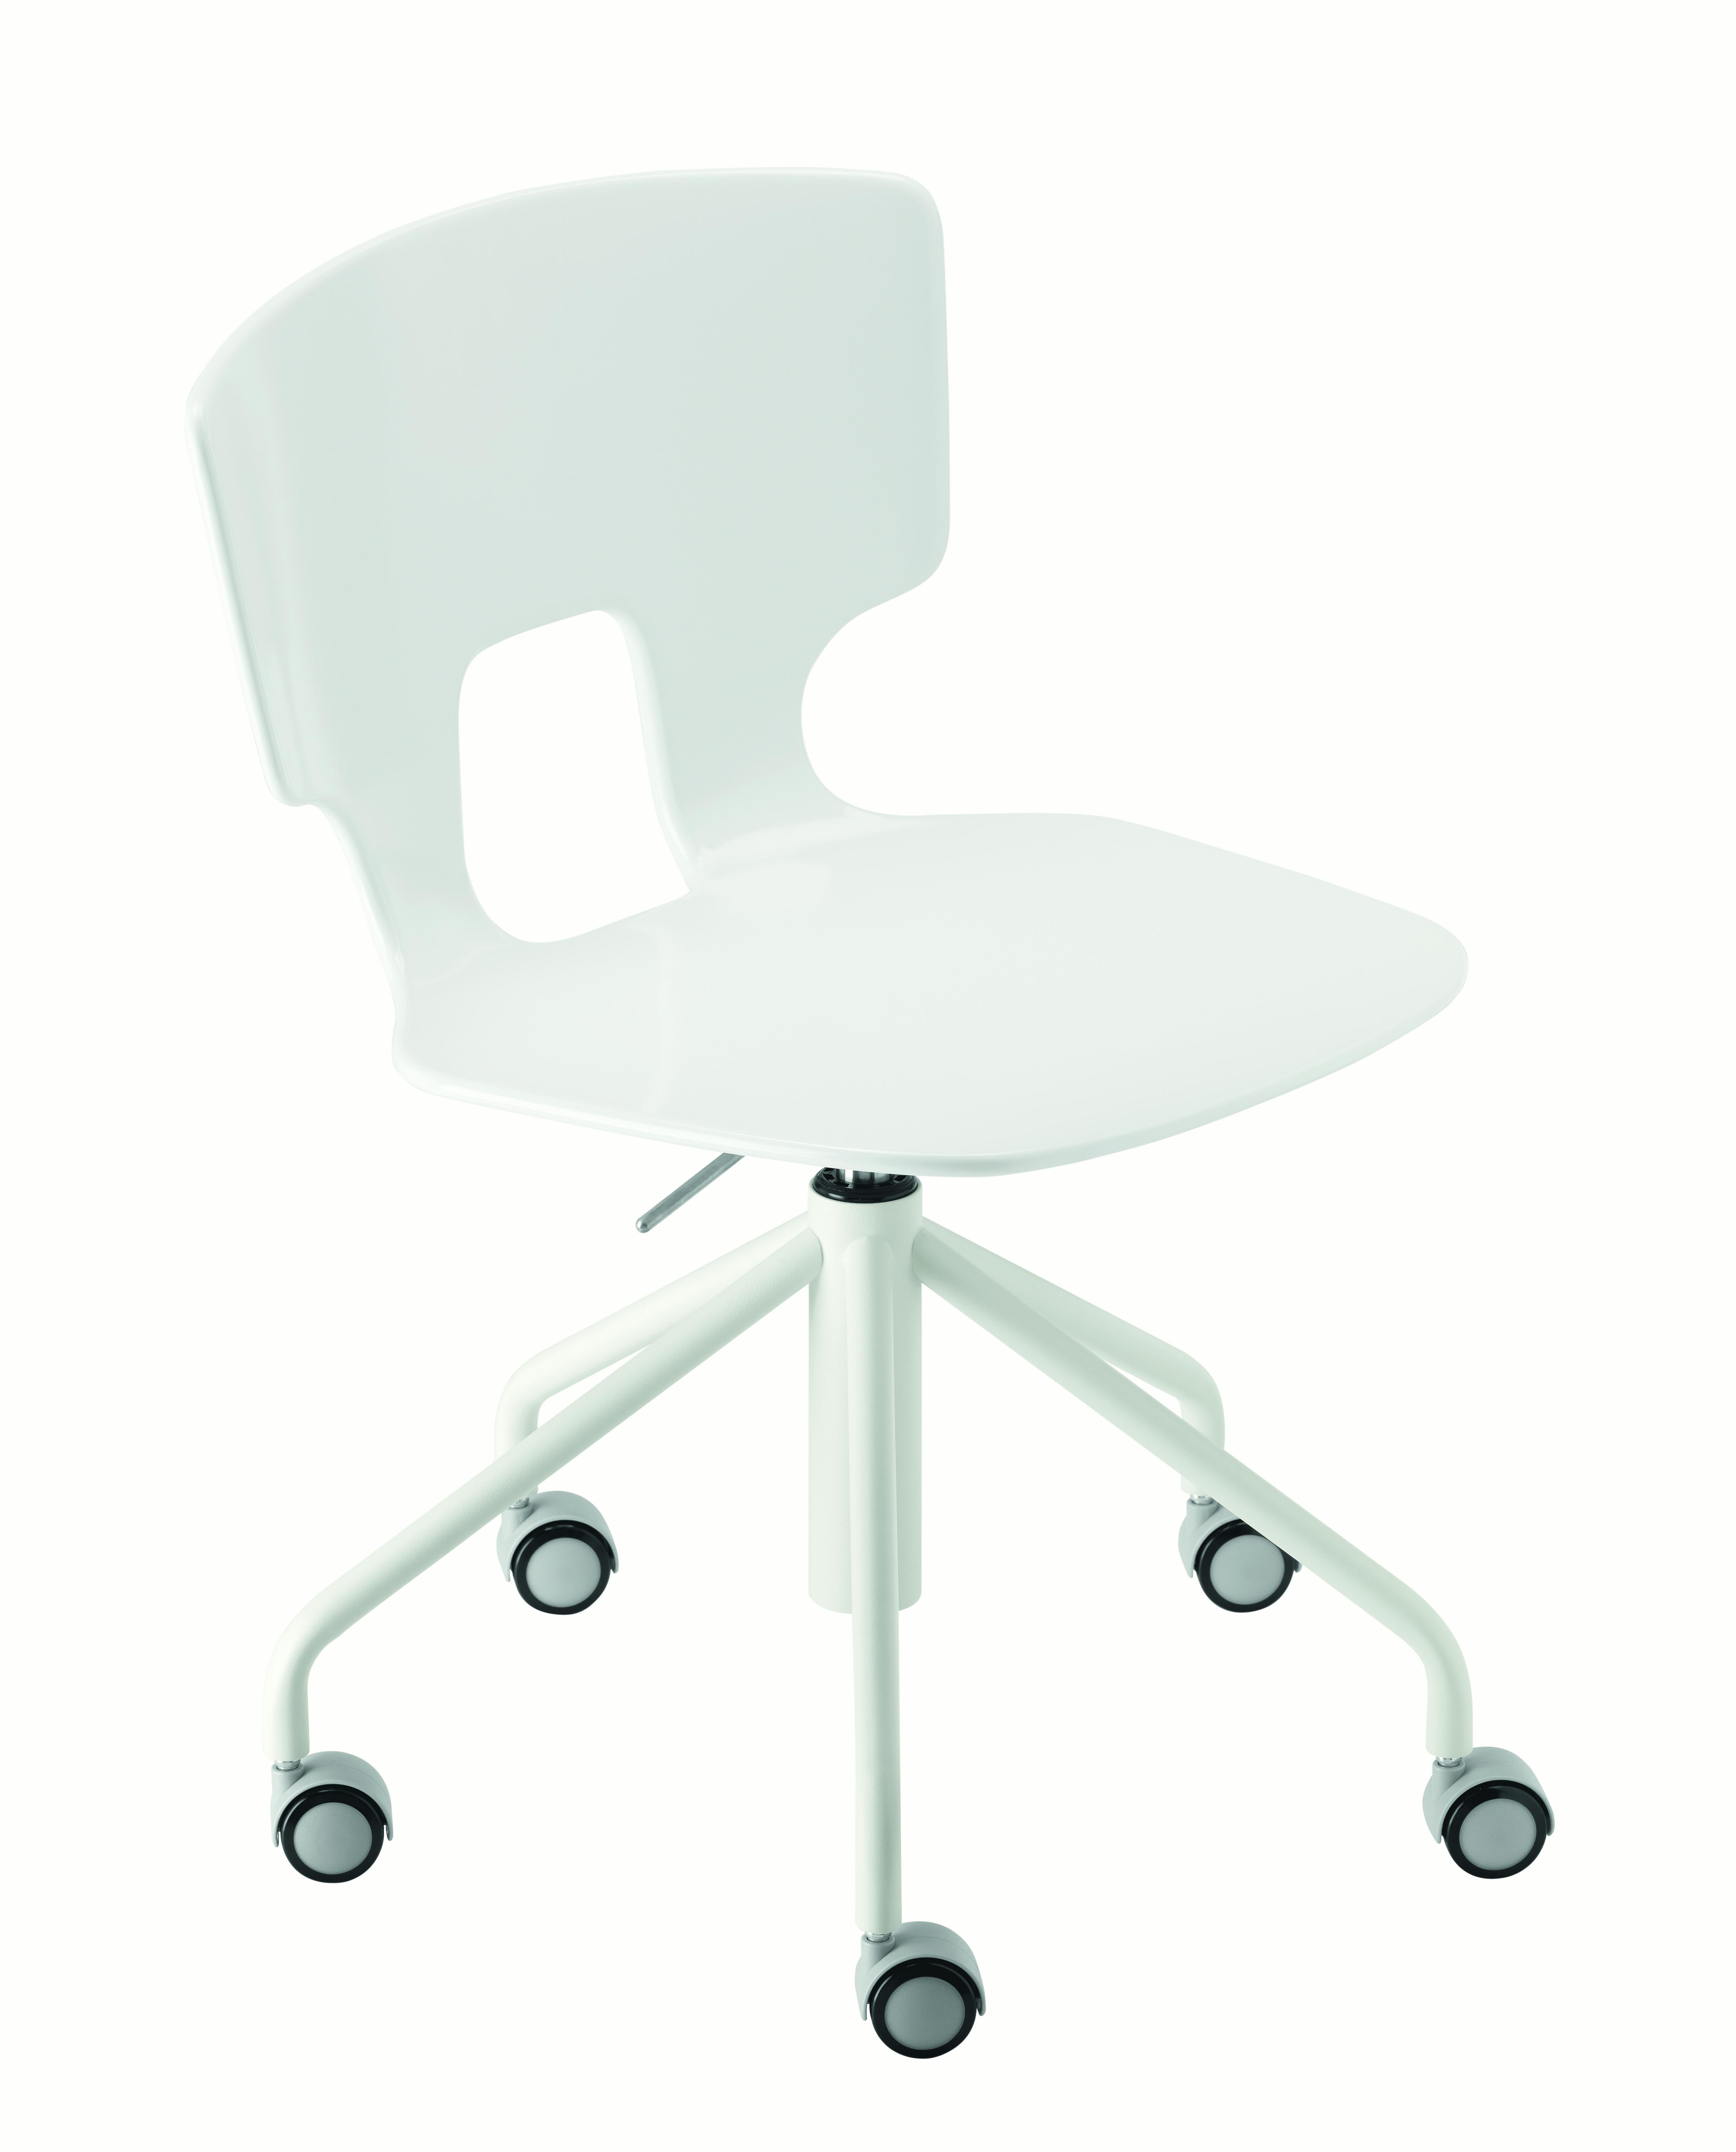 Alias 50C Erice Studio Chair in White Lacquered Steel Frame by Alfredo Häberli

Height adjustable chair on soft (or hard ***) castors, with 5-star swivel base in lacquered steel; seat and back in solid plastic material.*** on request

Born in